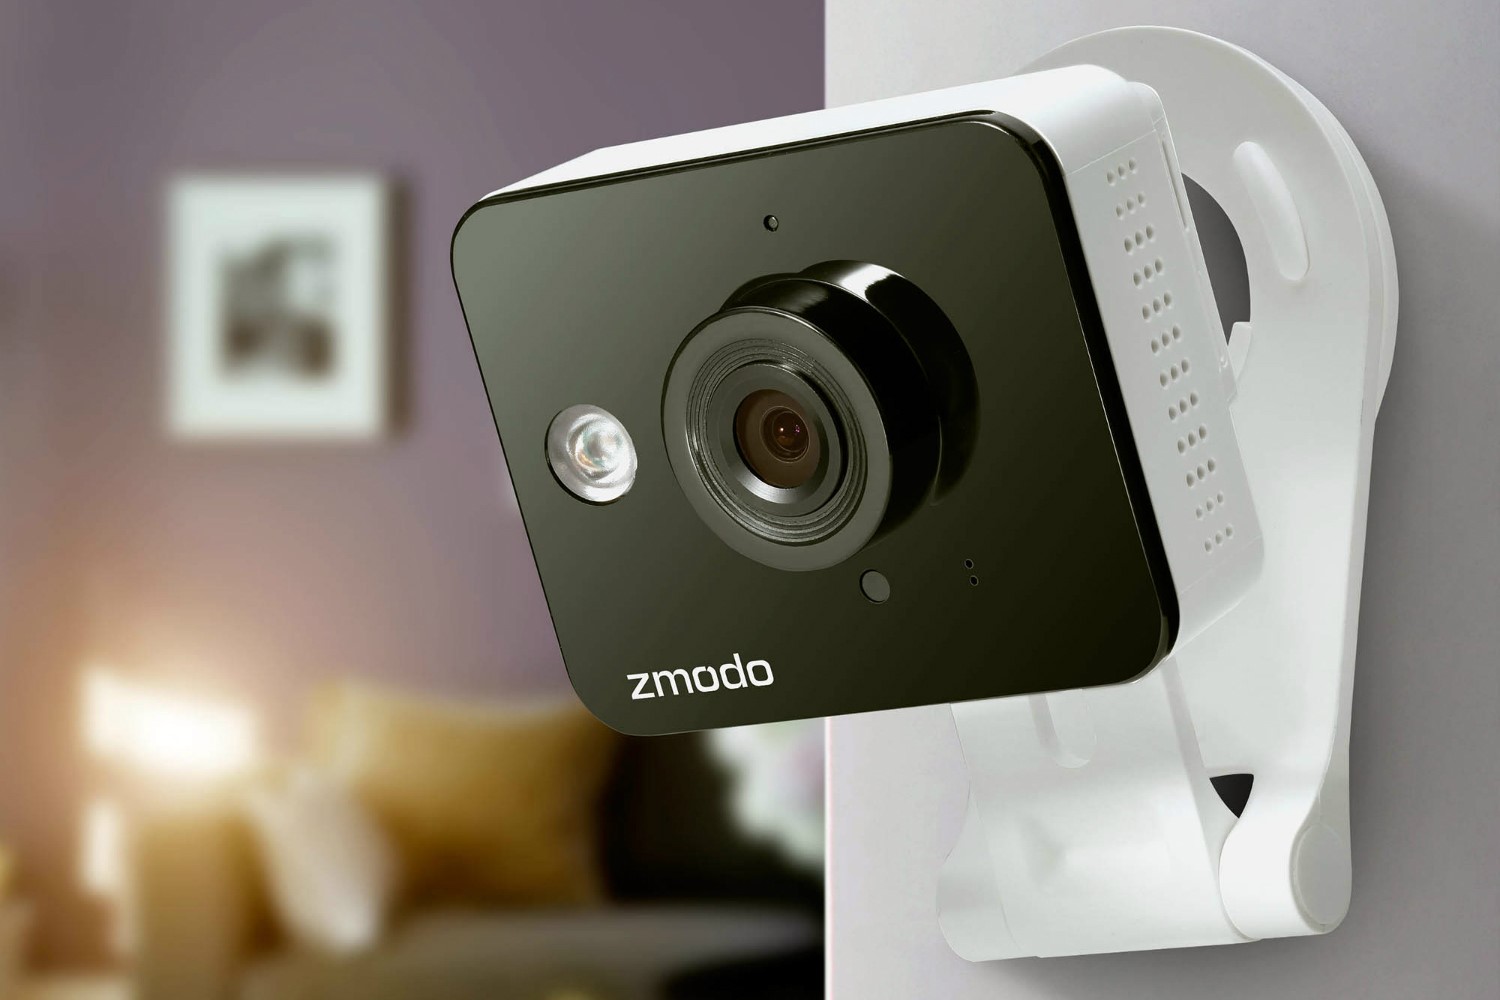 Why Isn't The Motion Detector Working On Zmodo Mini Camera